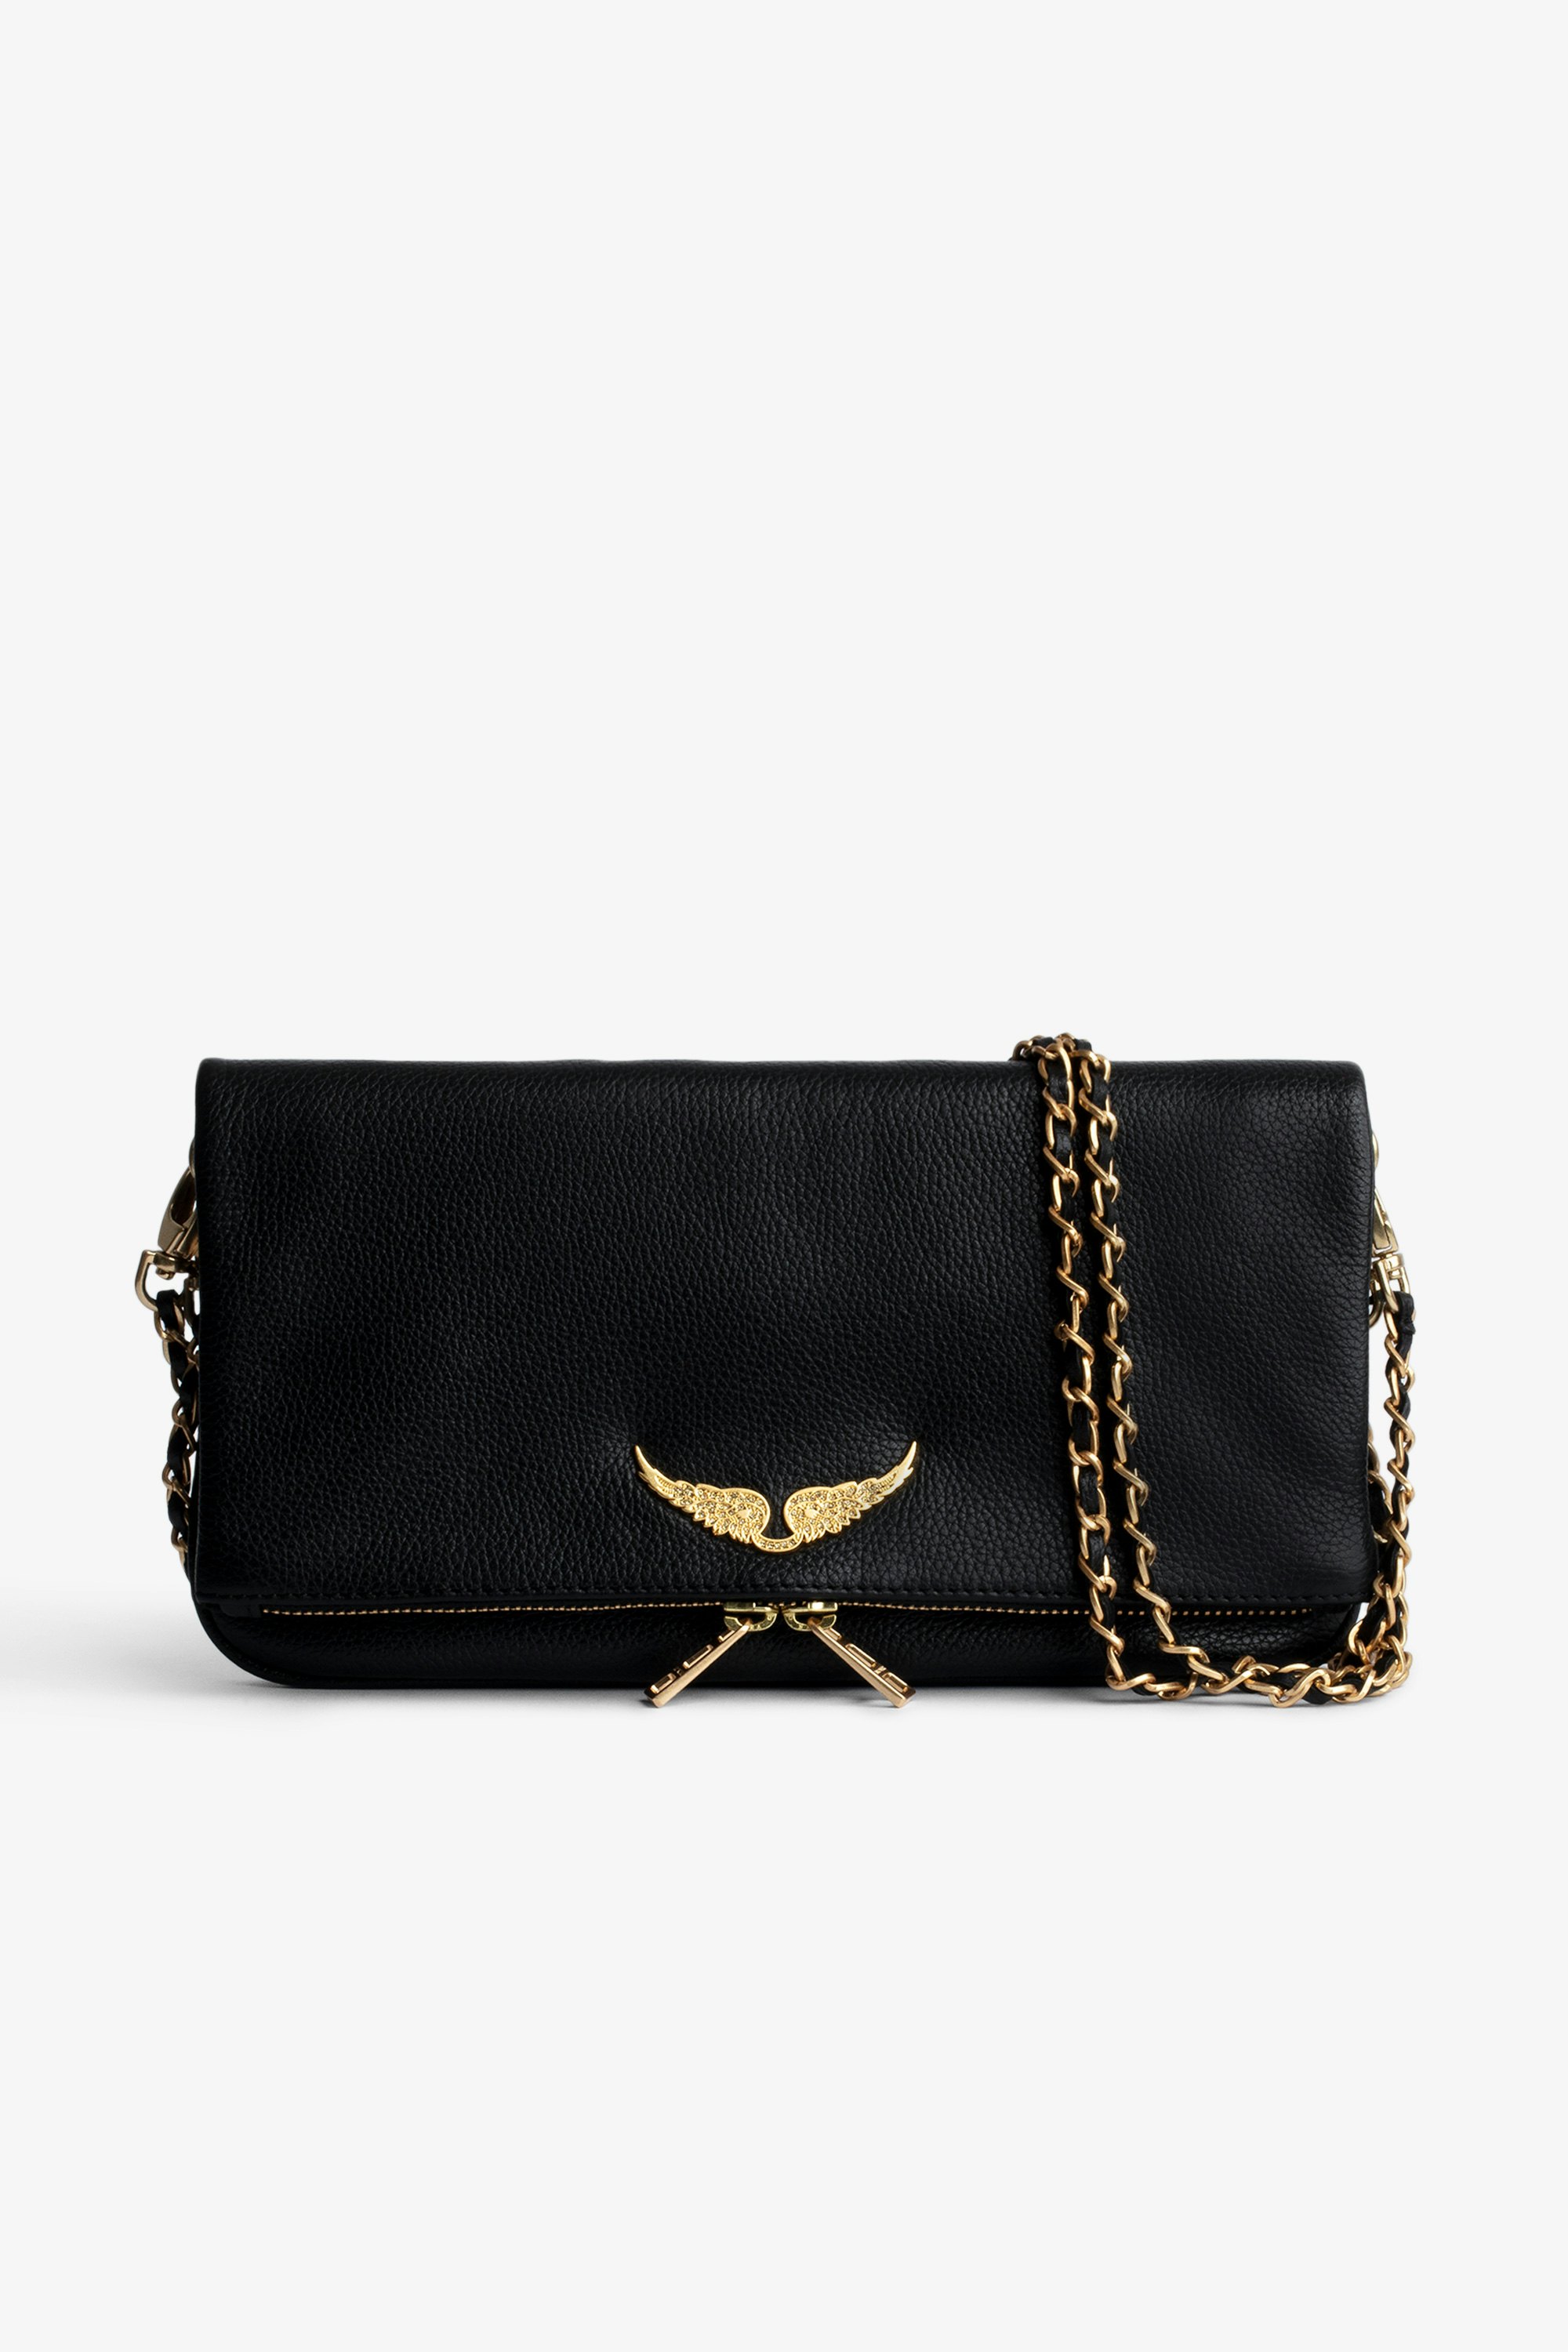 Rock Clutch Women’s black leather clutch with gold-toned detailing